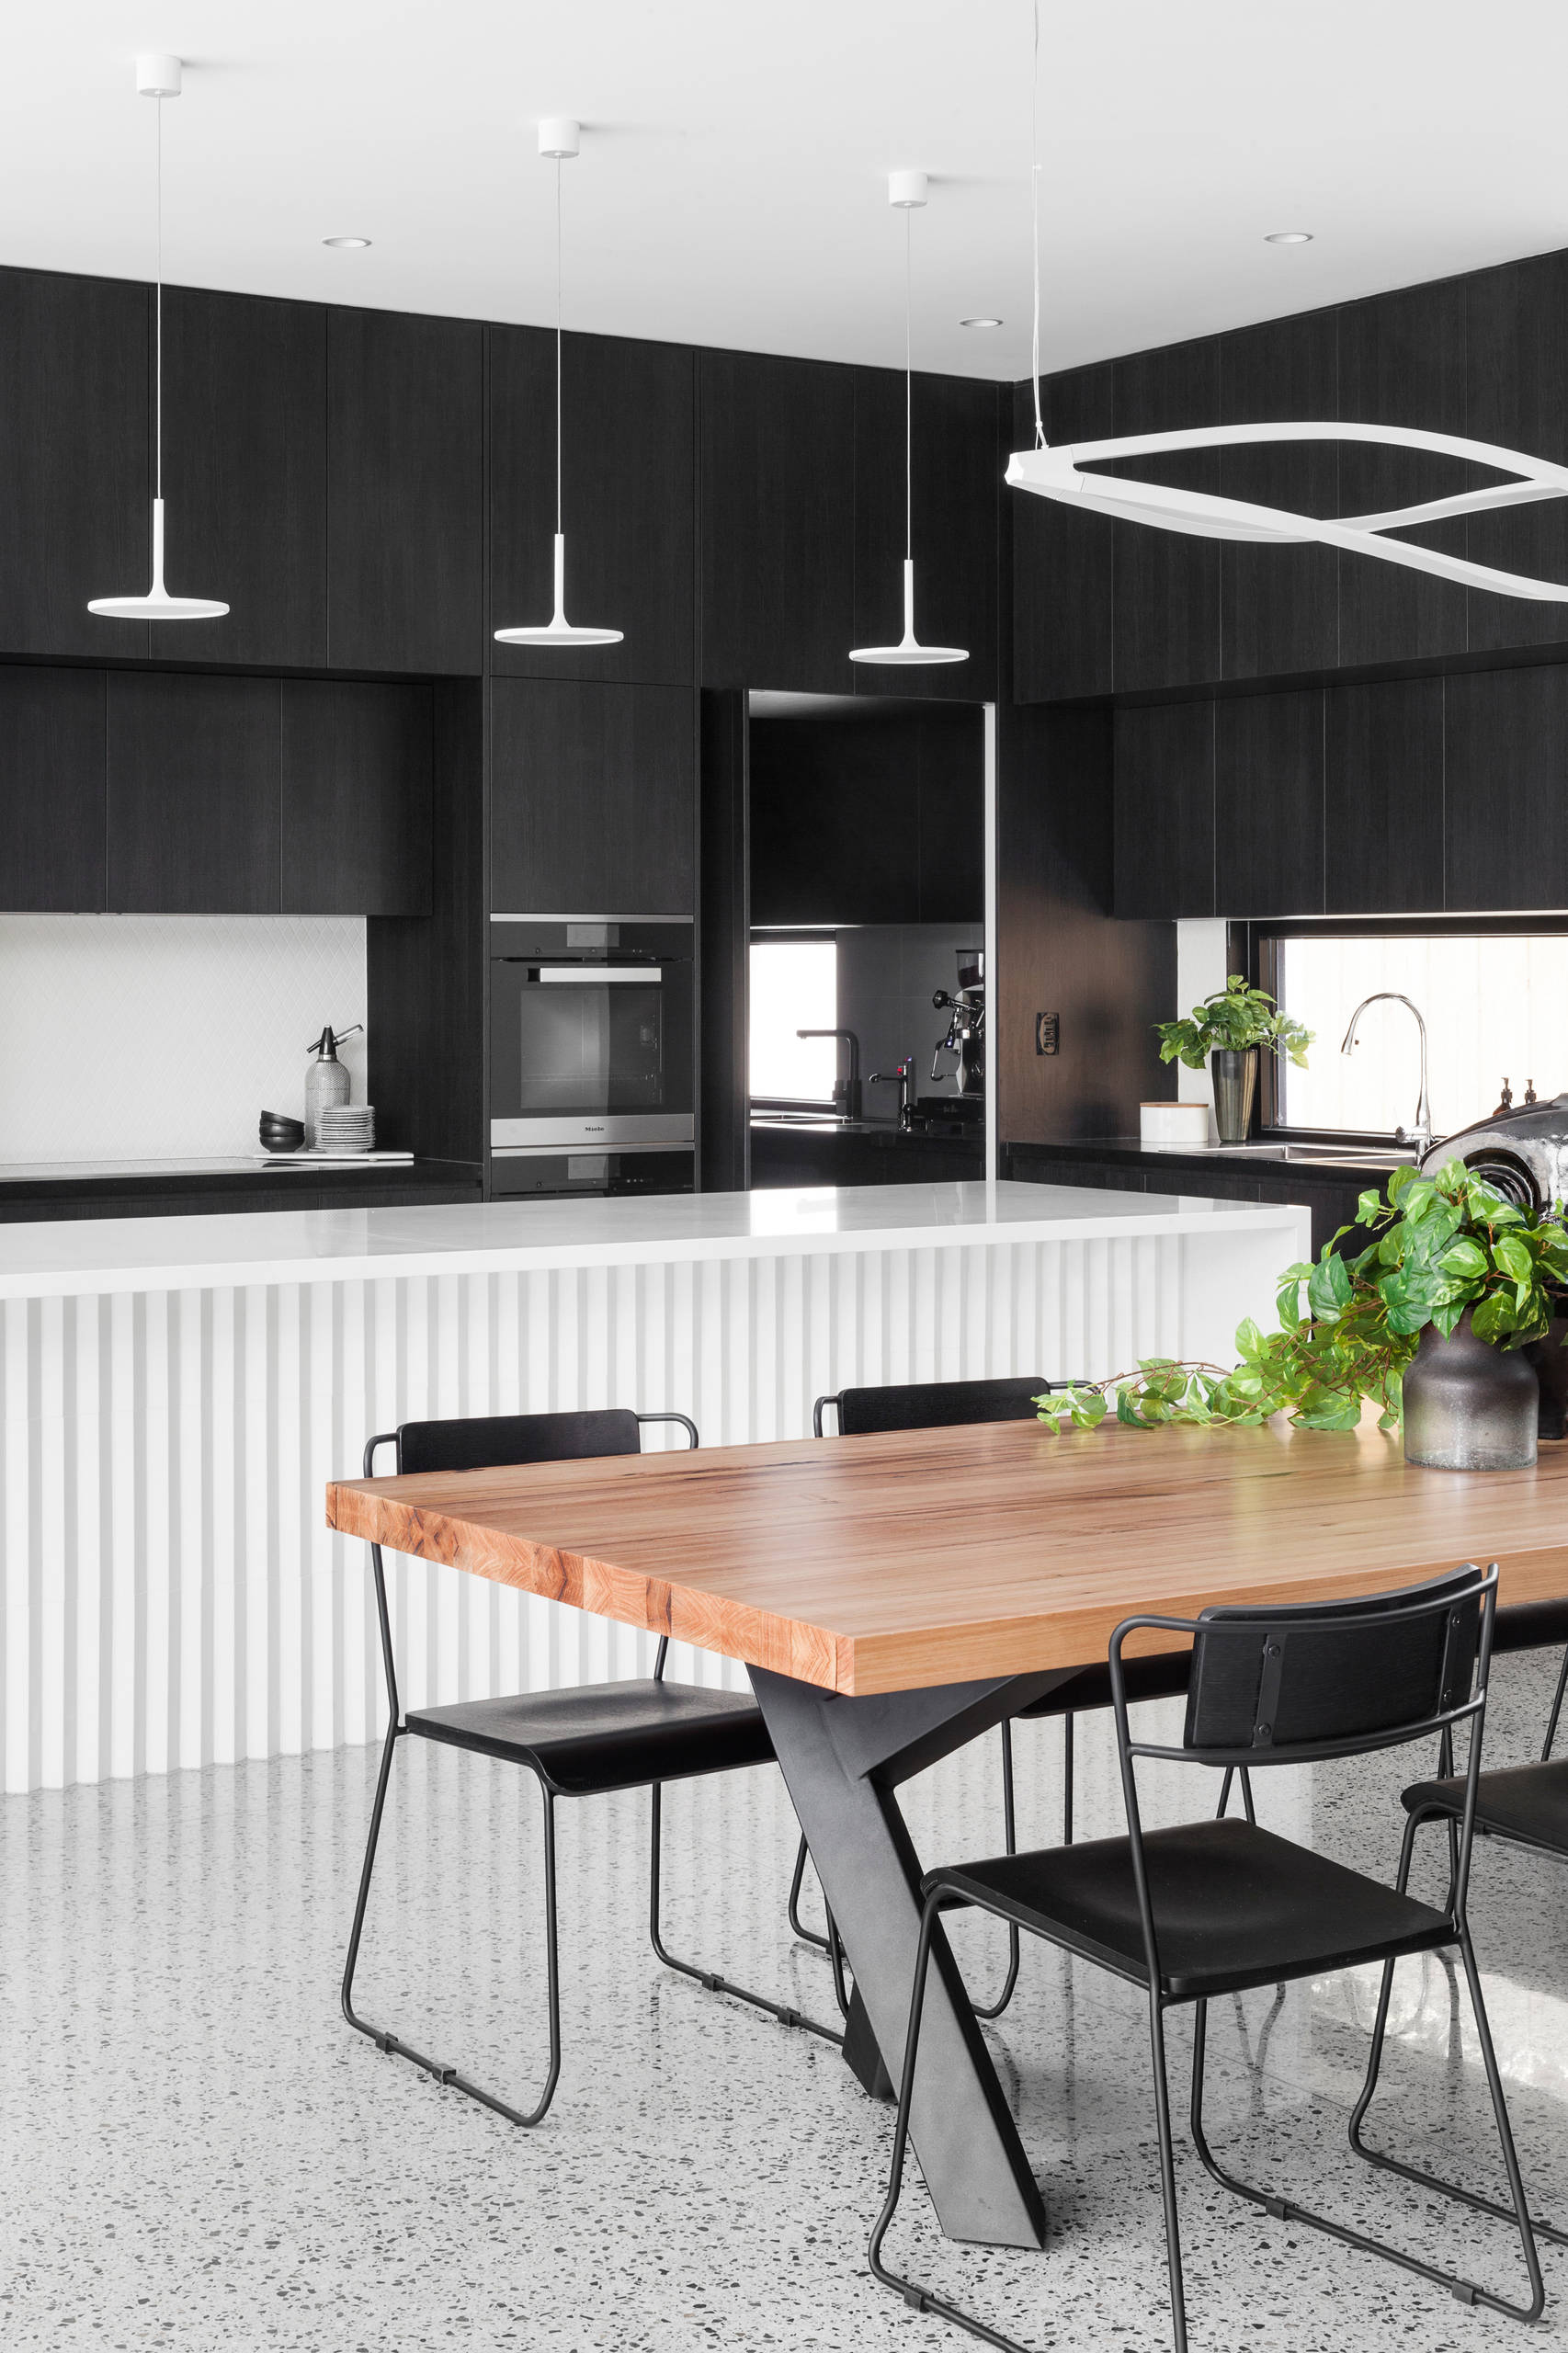 Warthen Team on X: Black kitchens are just as timeless as white ones, they  can be cozier and a little moodier. This stylish space just might inspire  you to go dark. #kitchen #